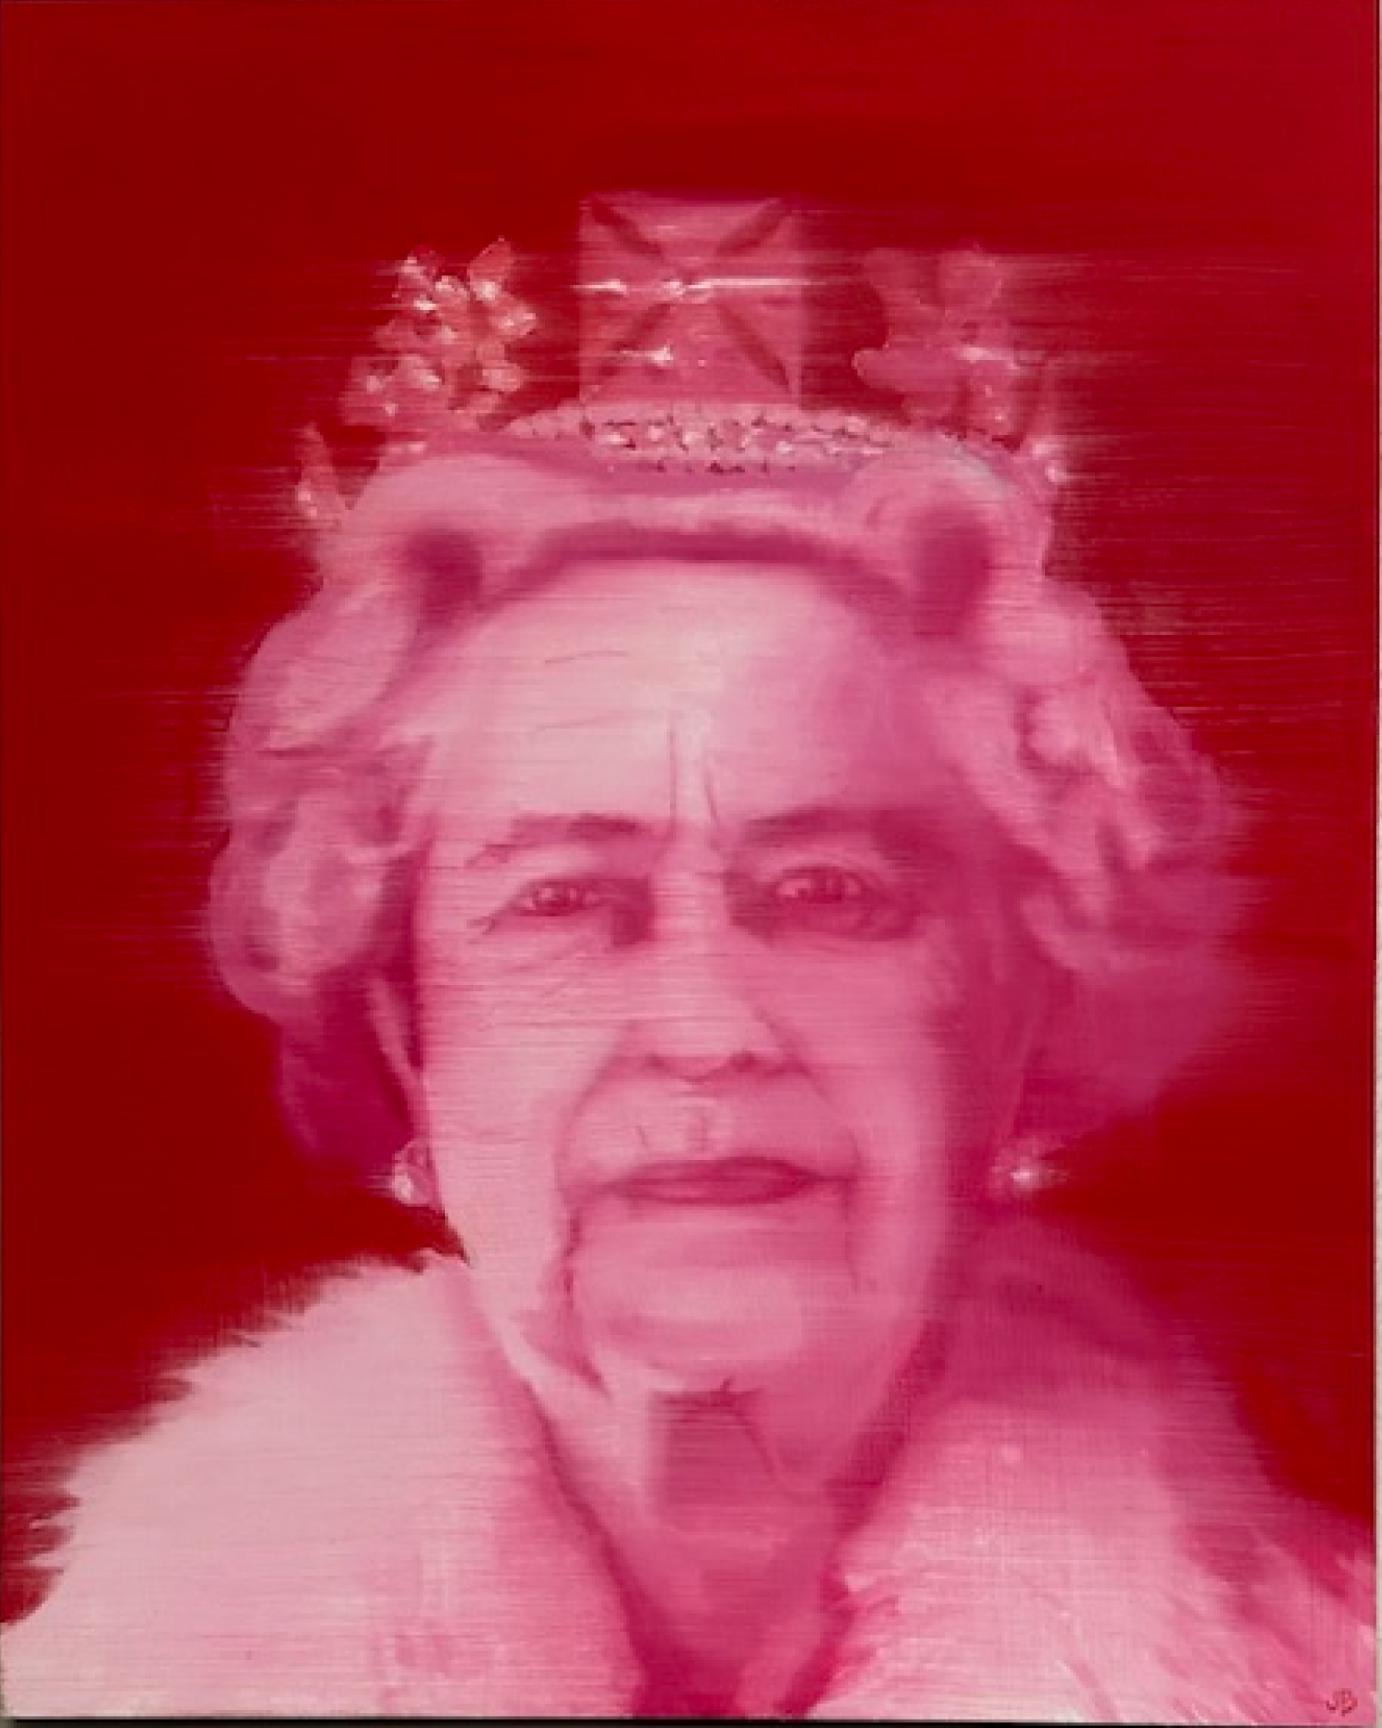 LOOK FOR FREE SHIPPING AT CHECKOUT.

ARTIST EXPLANATION OF THE PAINTINGS:
Queen Elizabeth 2  measures  20 x 16